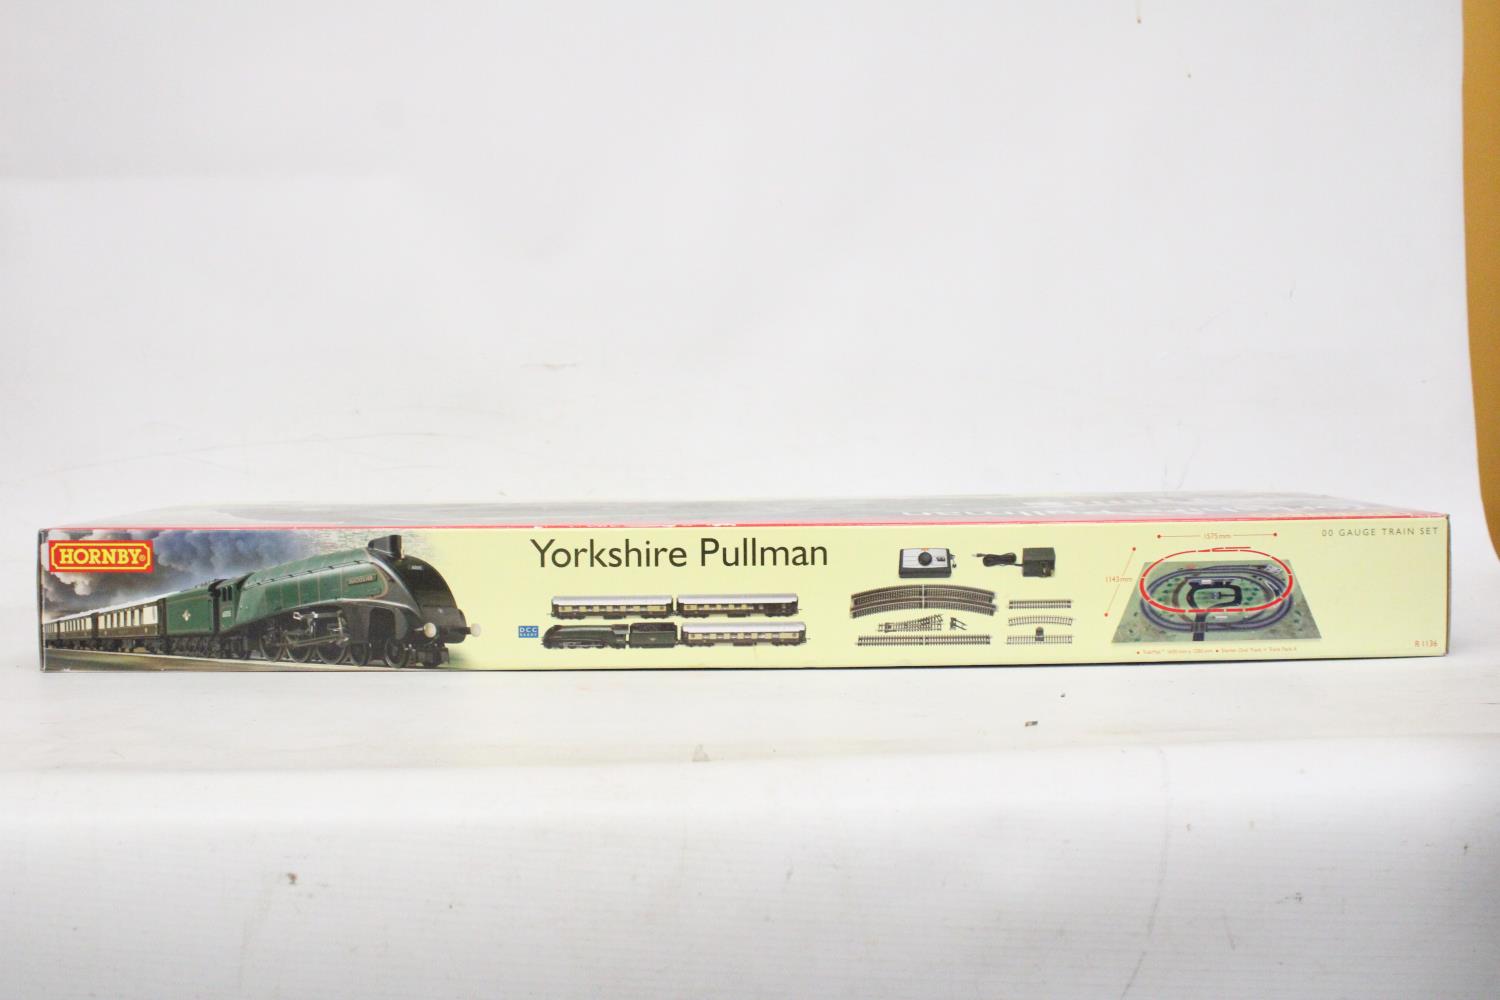 A HORNBY UNUSED YORKSHIRE PULLMAN 00 GAUGE COMPLETE TRAIN SET WITH A CLASS A4 QUICKSILVER - Image 2 of 5